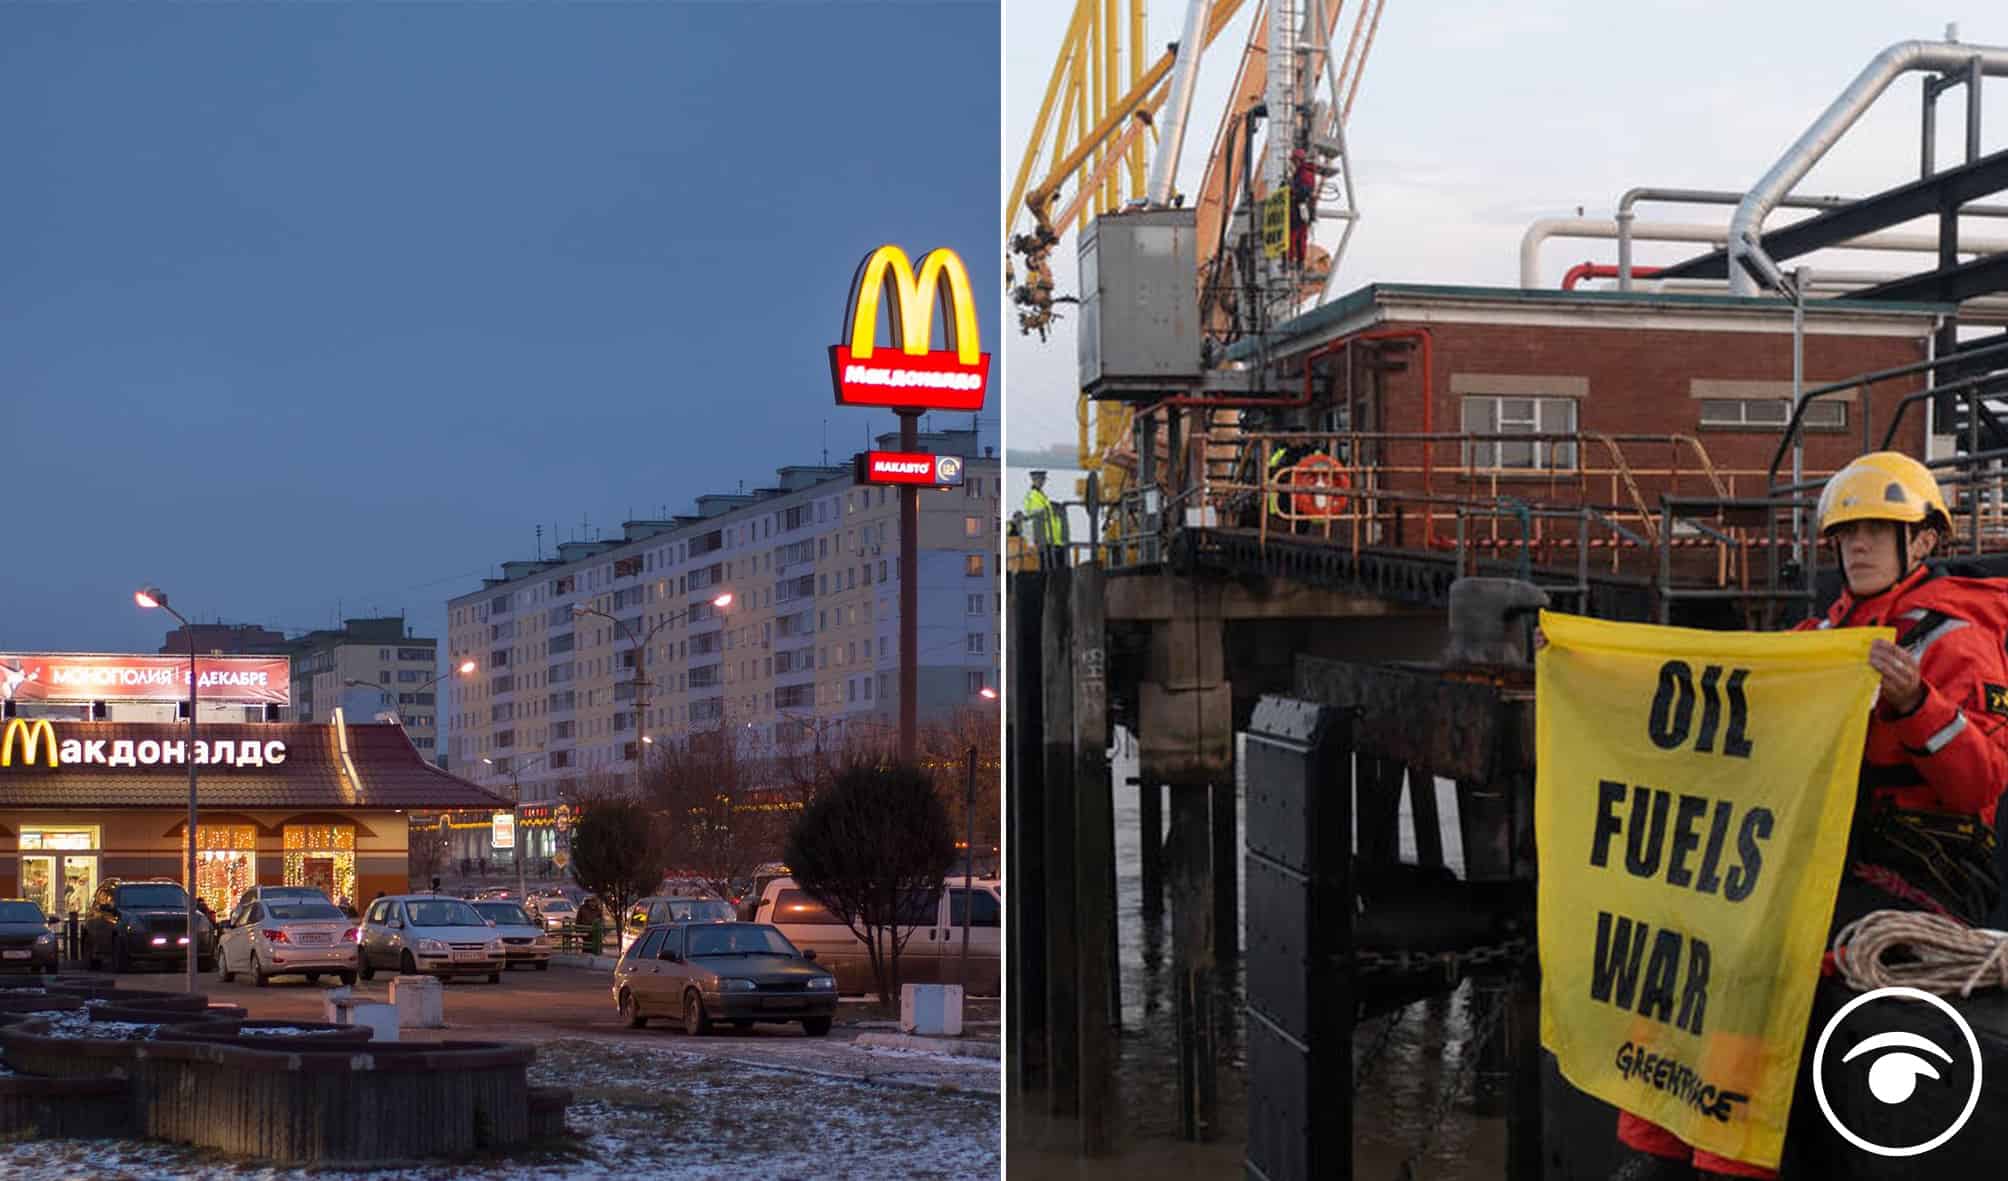 McDonald’s to leave Russia as Greenpeace blocks tanker carrying Putin’s diesel to UK